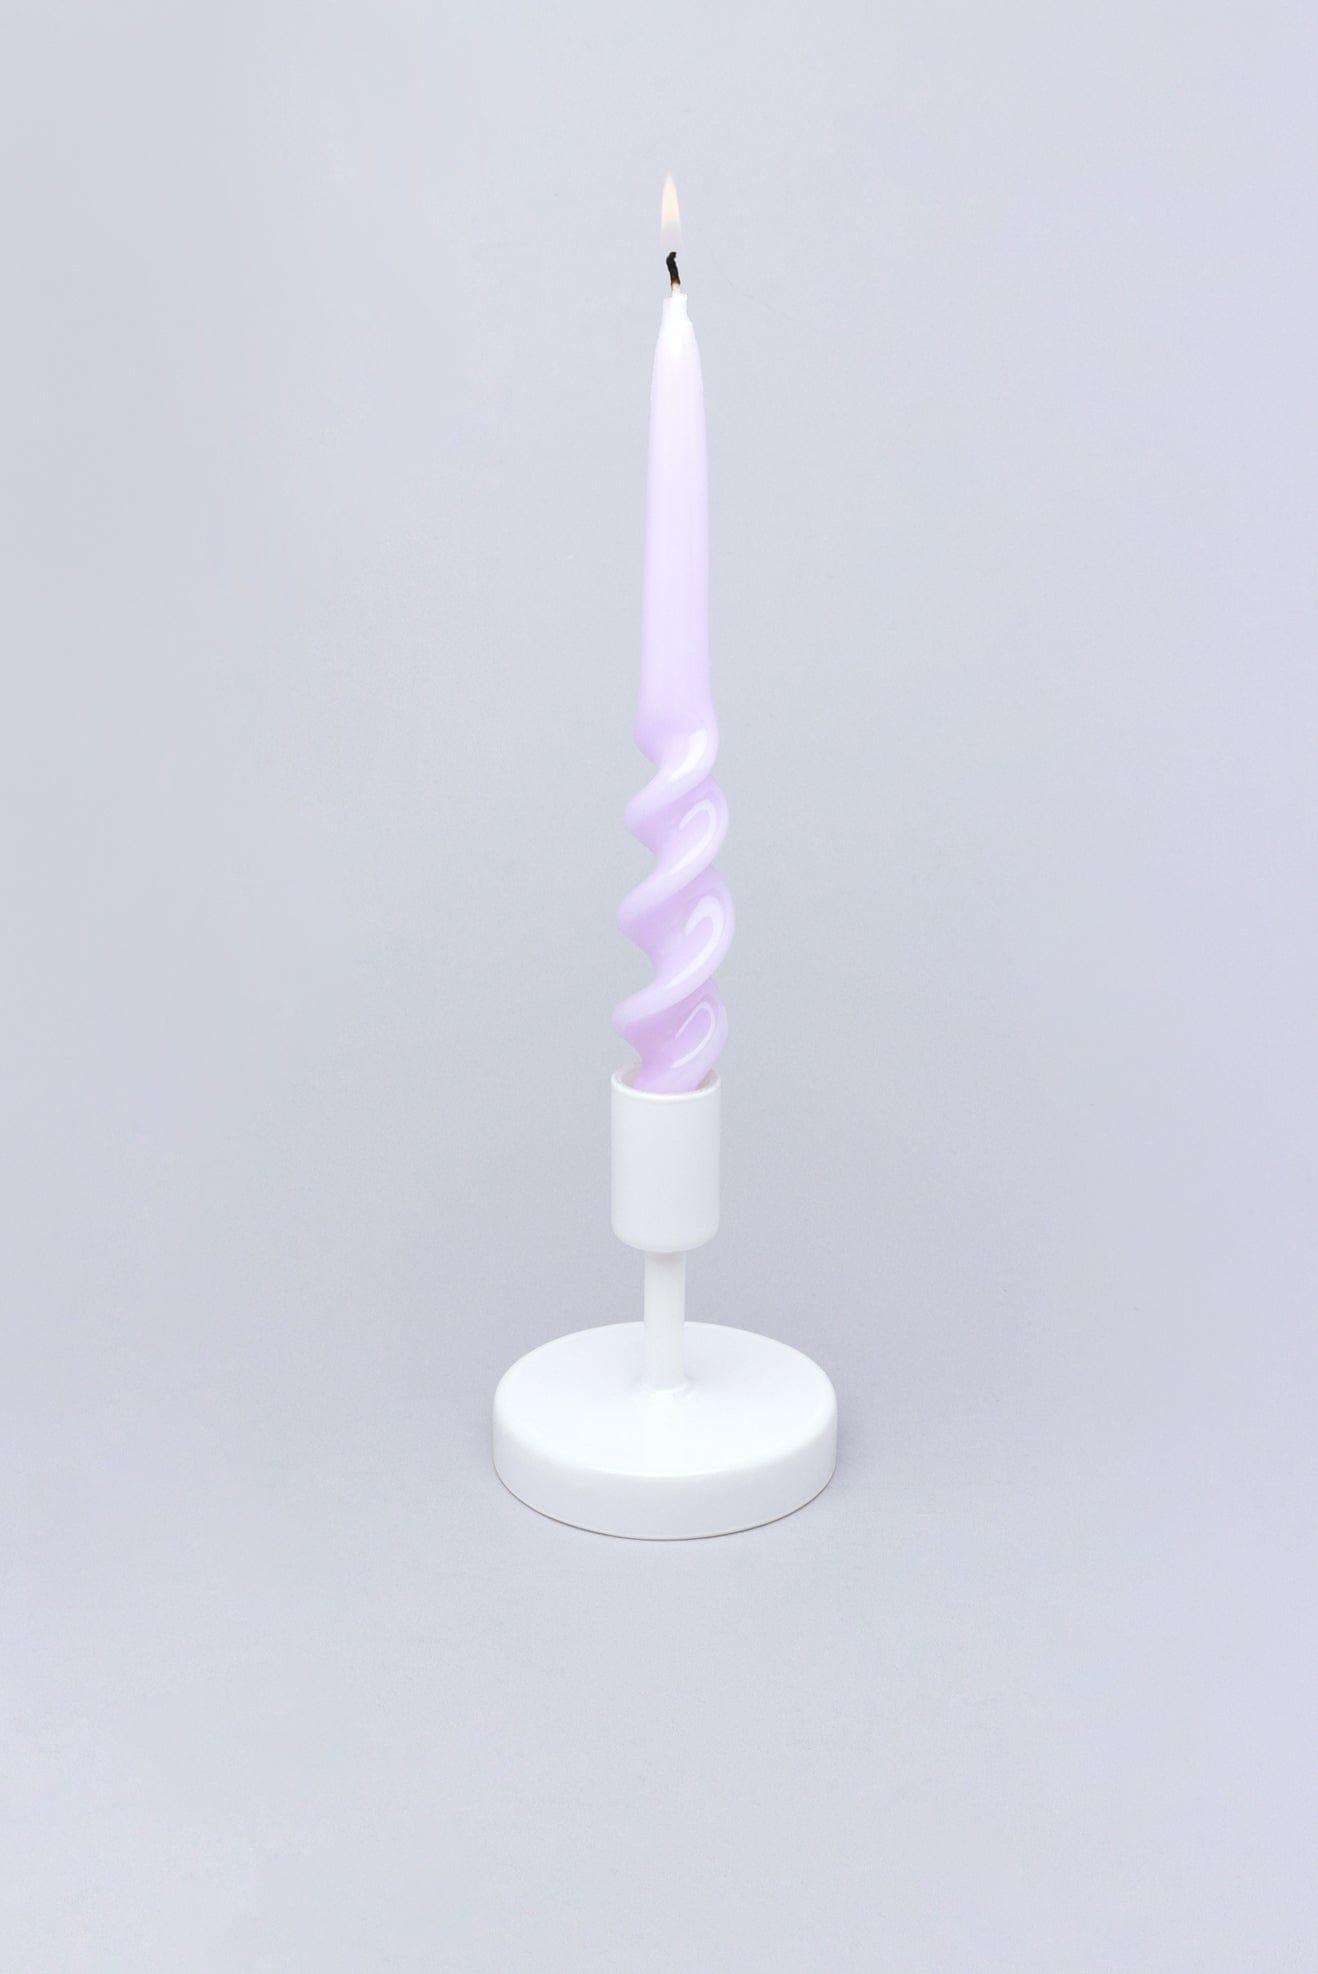 G Decor Pastel Purple Set of 2 Pastel Purple 9-inch Spiral Twisted Hand Dipped Candlesticks Taper Church Dinner Candles